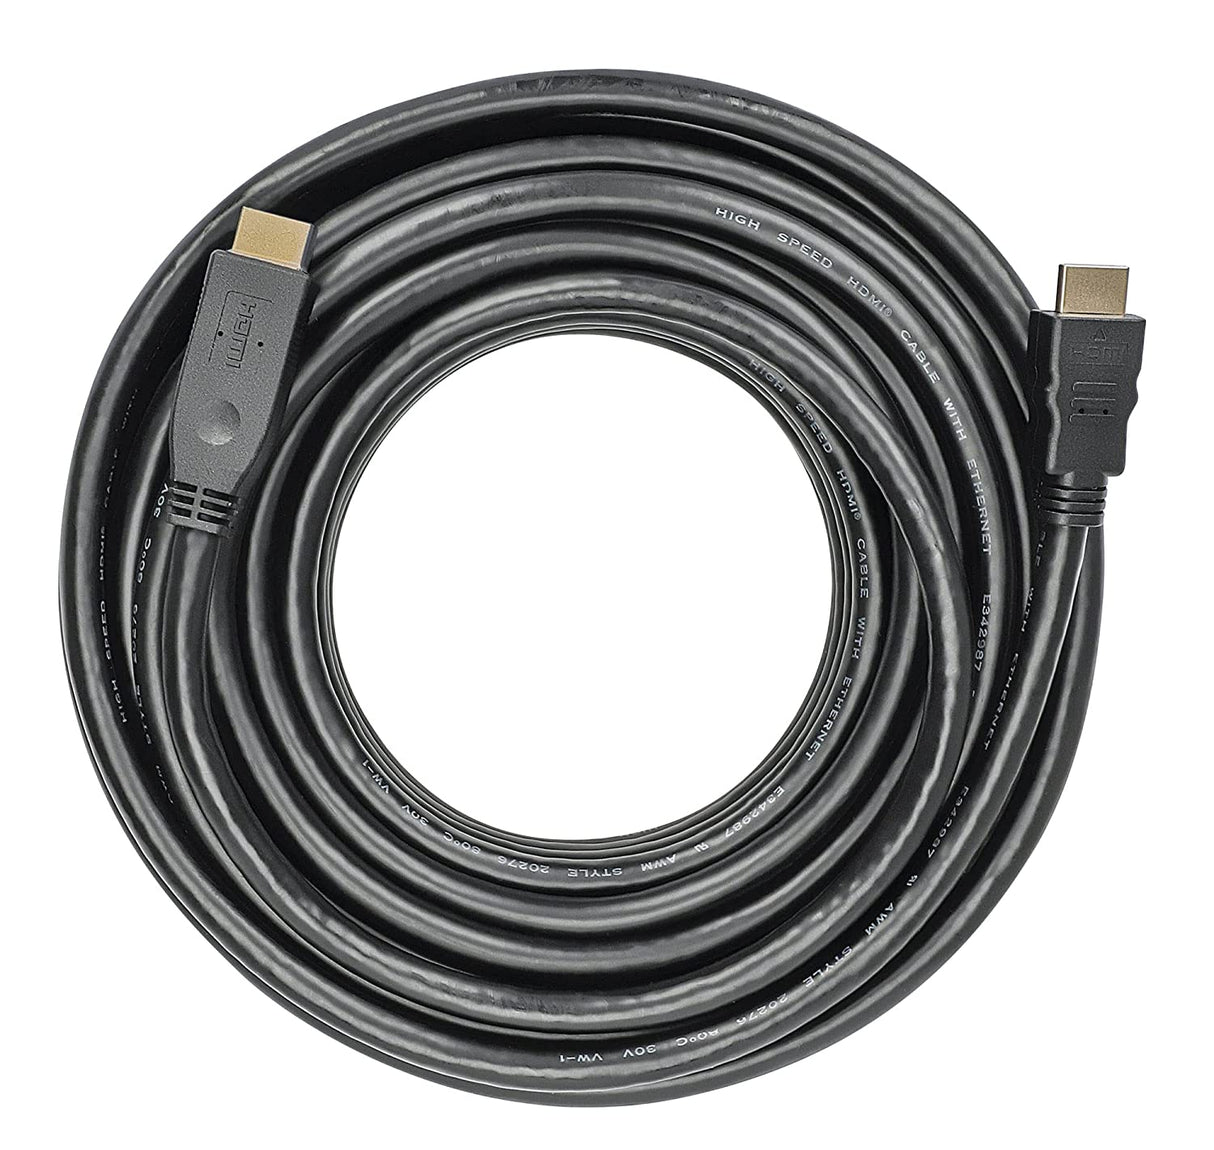 Manhattan 4K High Speed HDMI Cable - 50 ft – in-Wall CL3, 4k 60hz, 10.2Gbps, HEC, ARC, 3D Video, Gold Contacts – Lifetime Mfg Warranty - for PS5, Xbox, TV - 354486